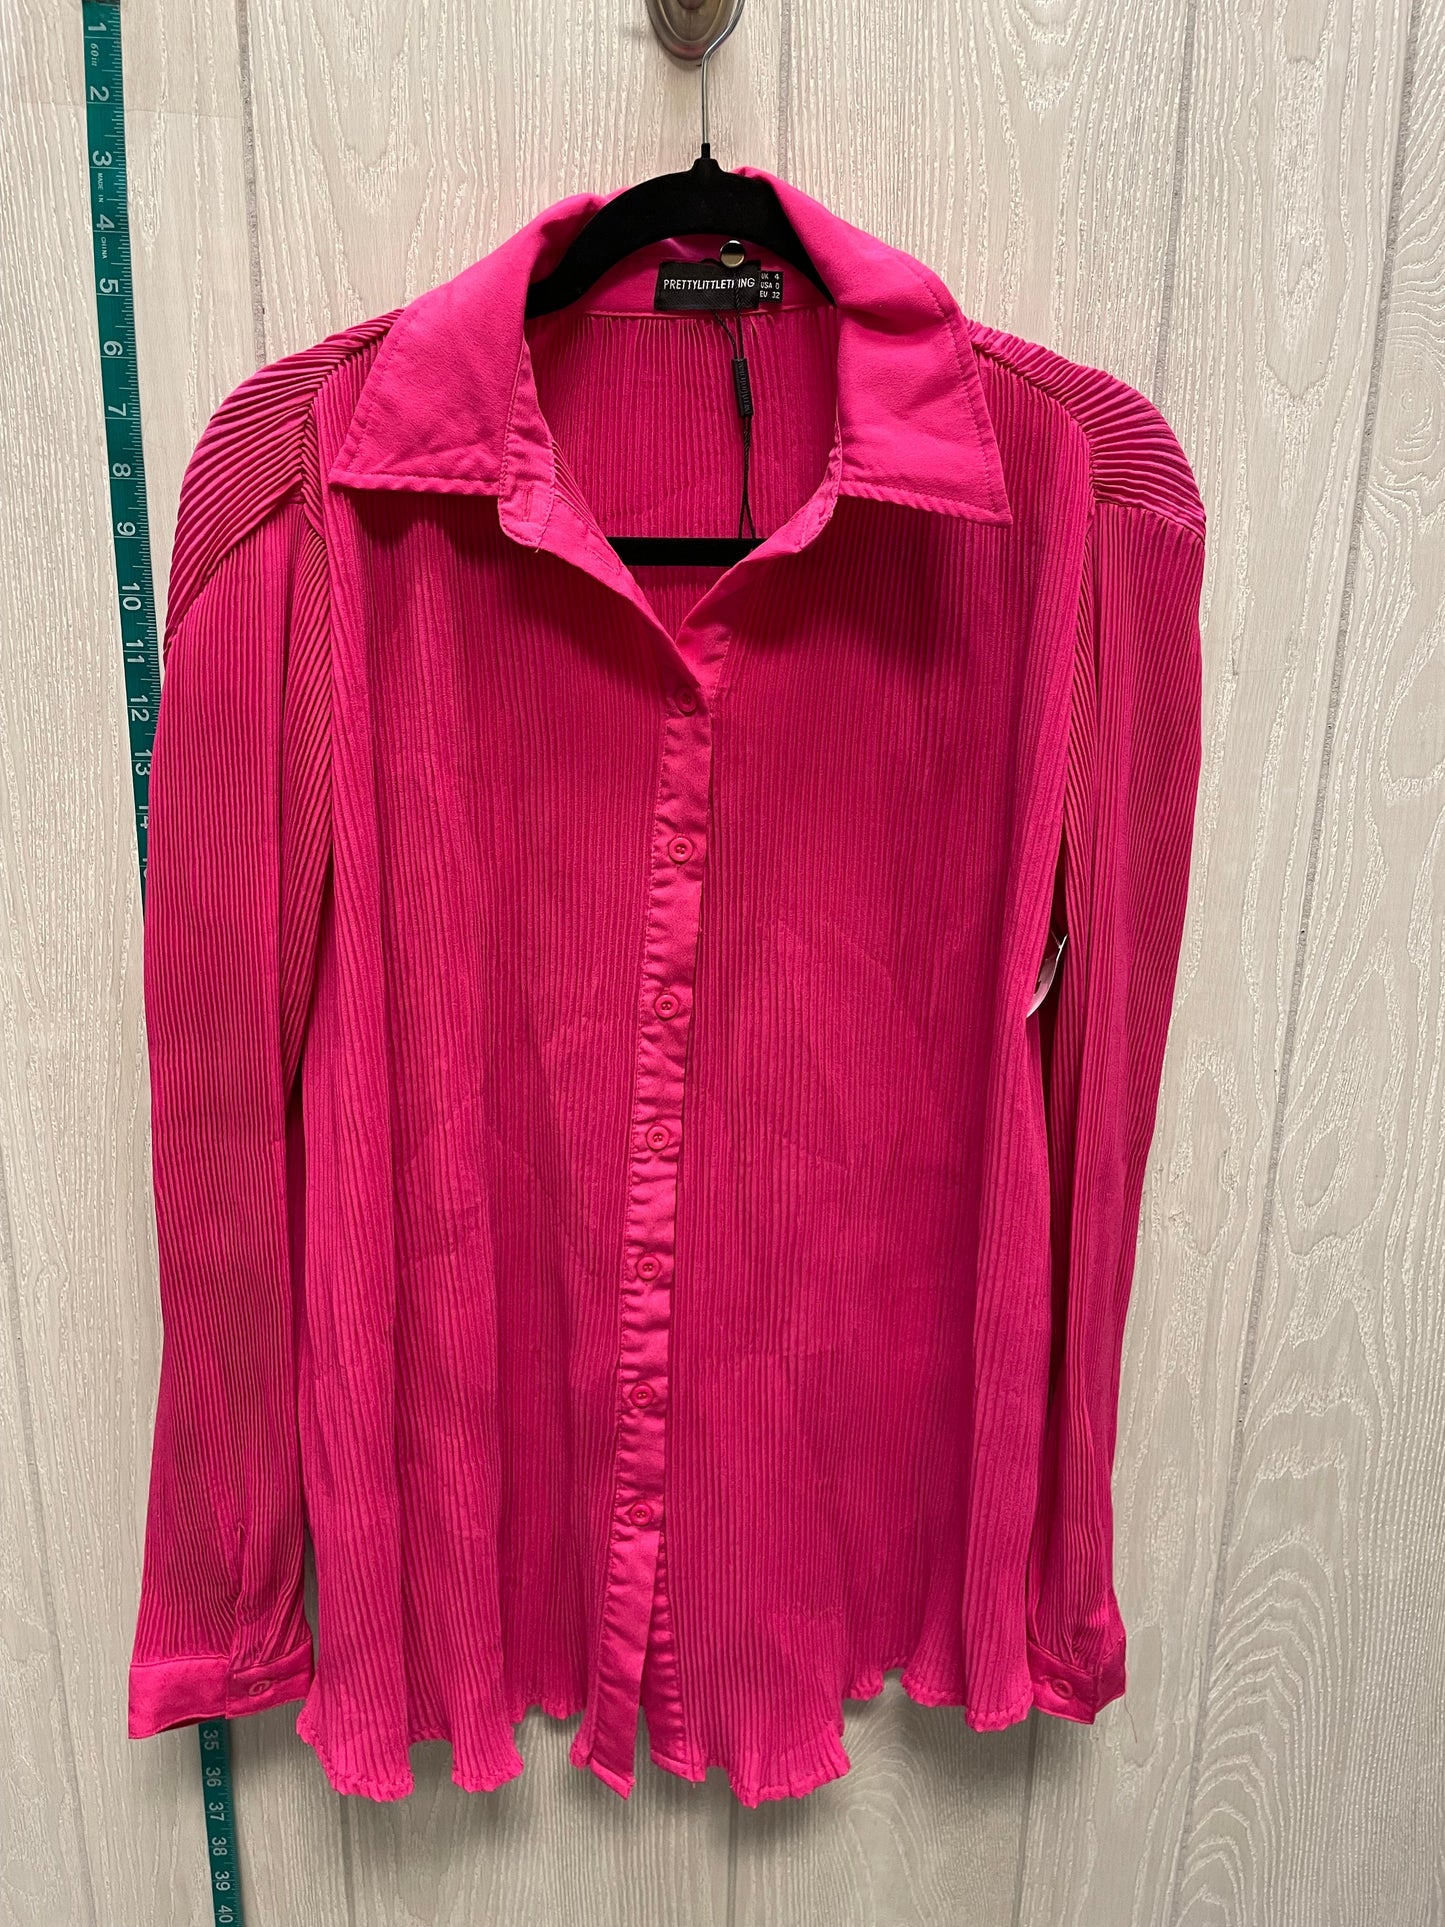 Pink Top Long Sleeve Pretty Little Thing, Size Xs